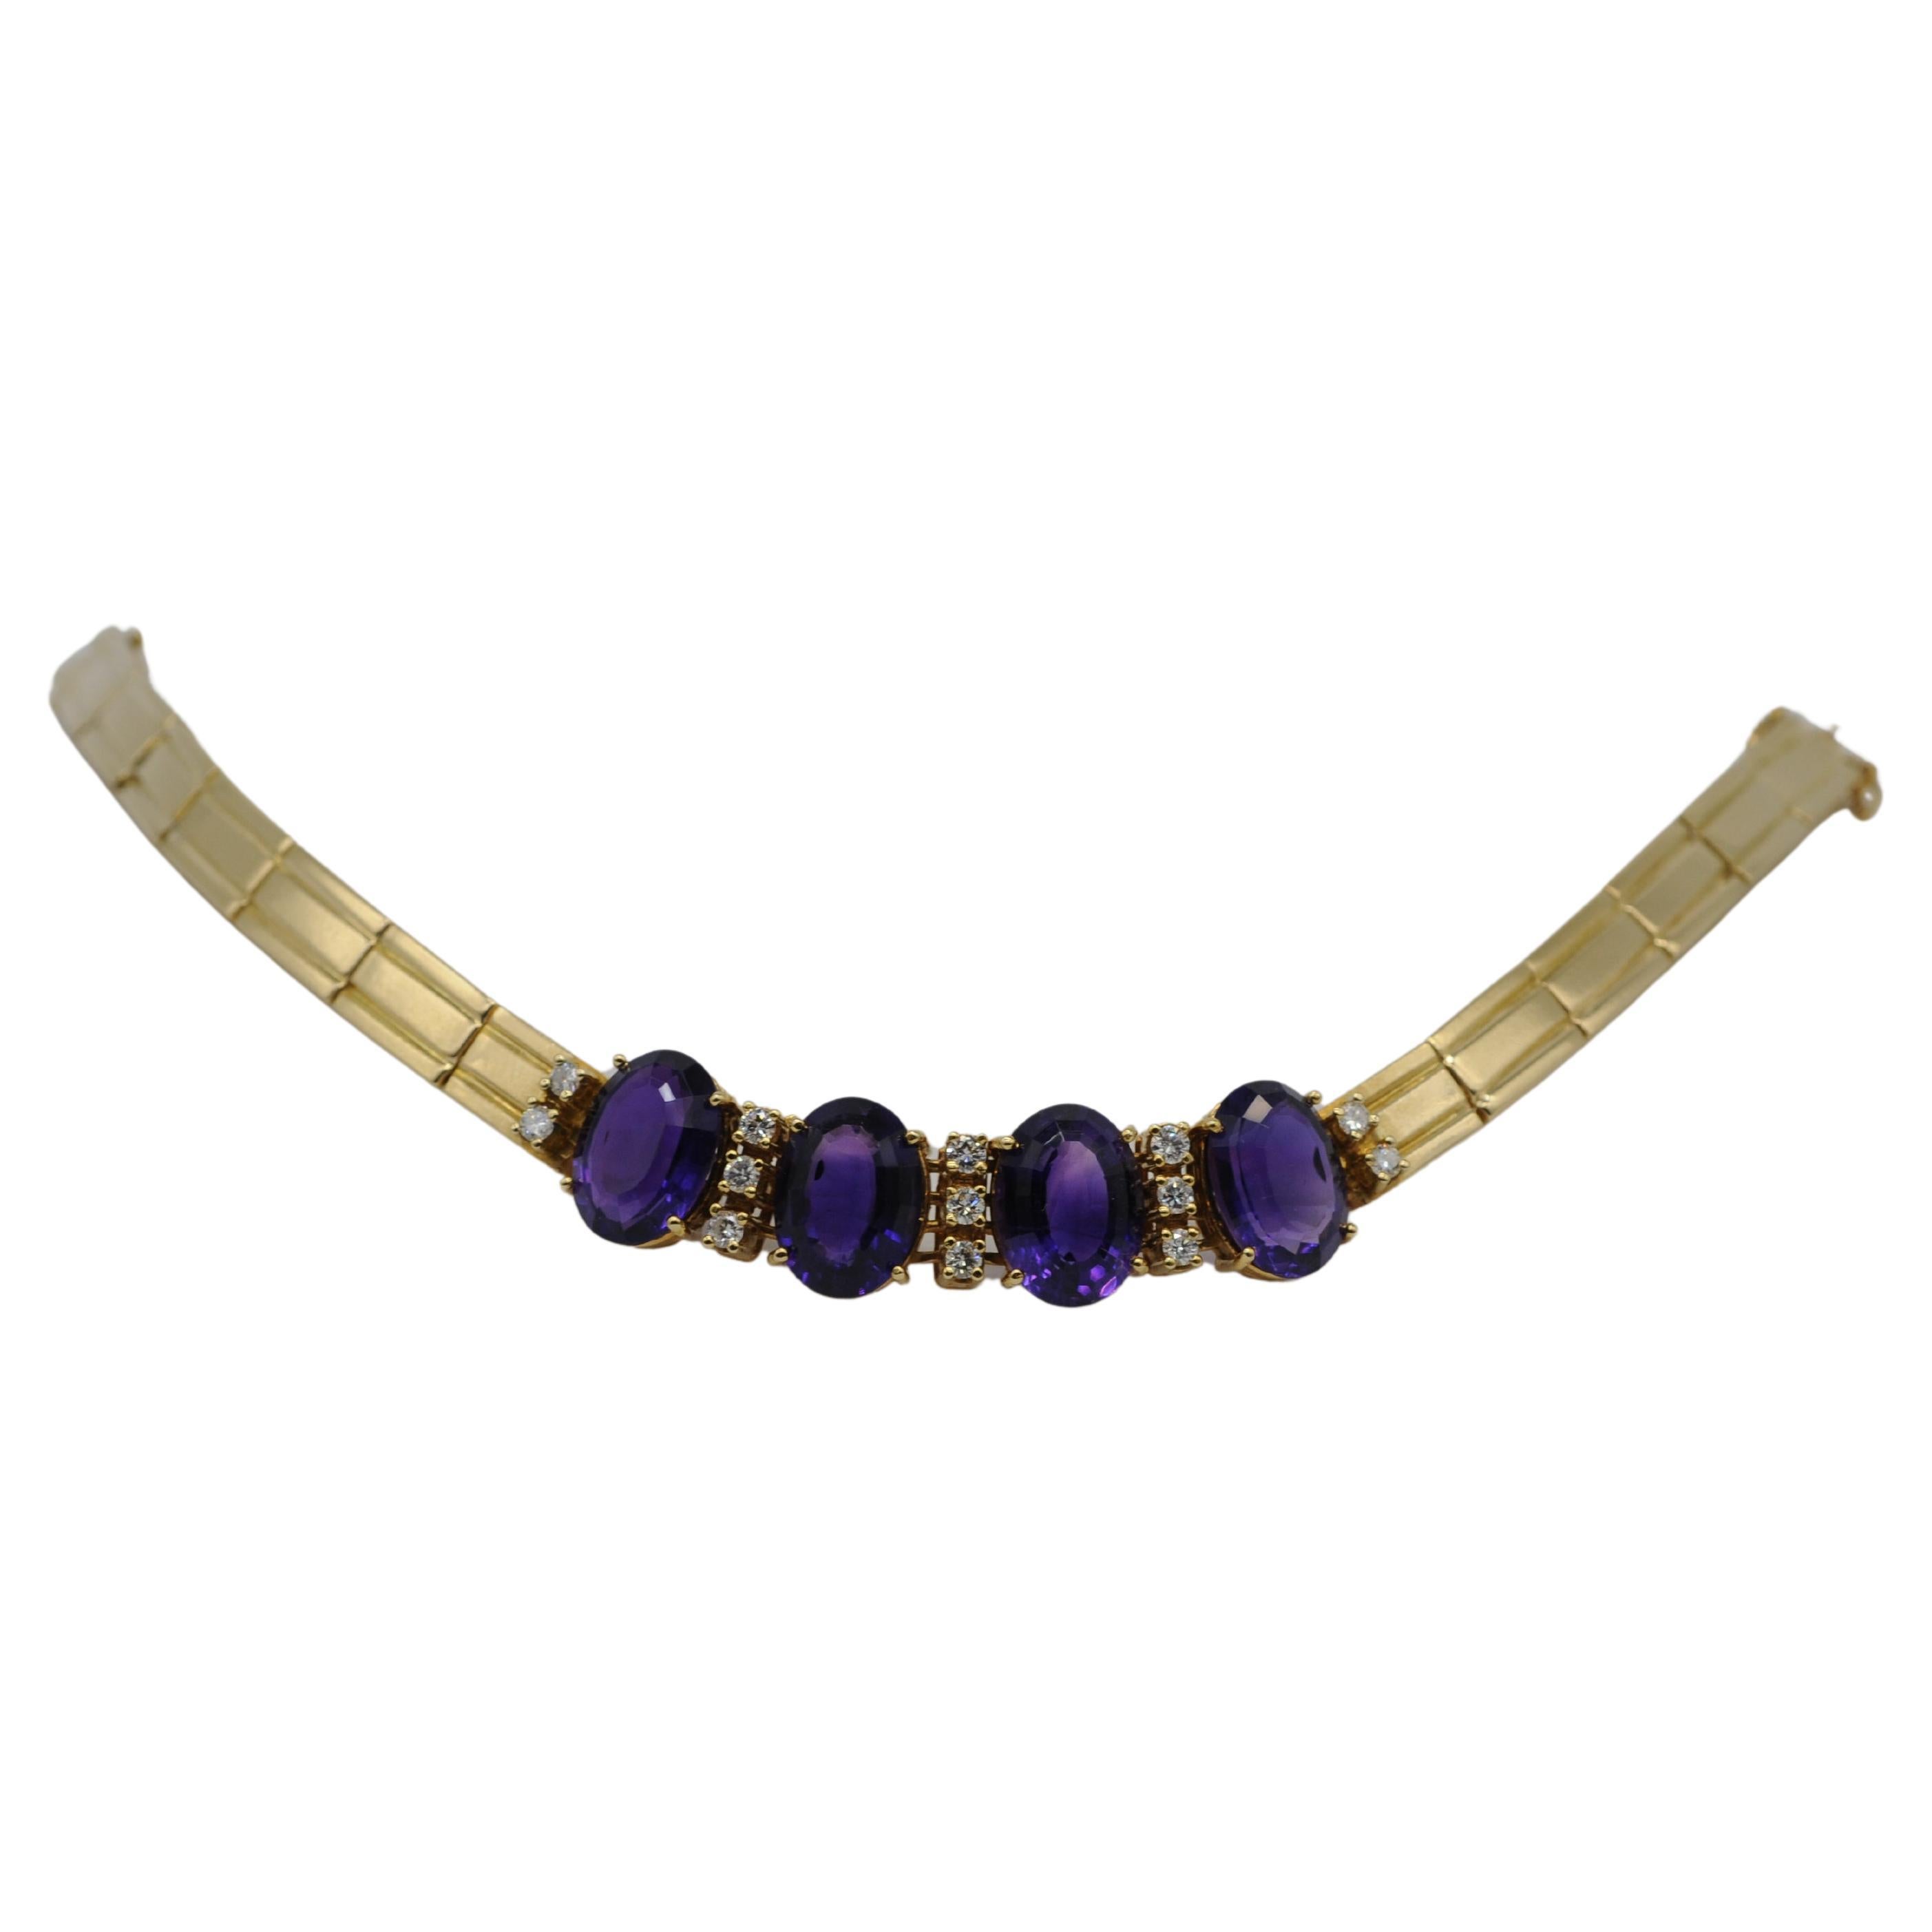 
Indulge in the dreamlike beauty of this exquisite 18k yellow gold bracelet—a true masterpiece of craftsmanship. This substantial bracelet boasts thick links adorned with four amethysts, each expertly cut in an oval shape reminiscent of emerald